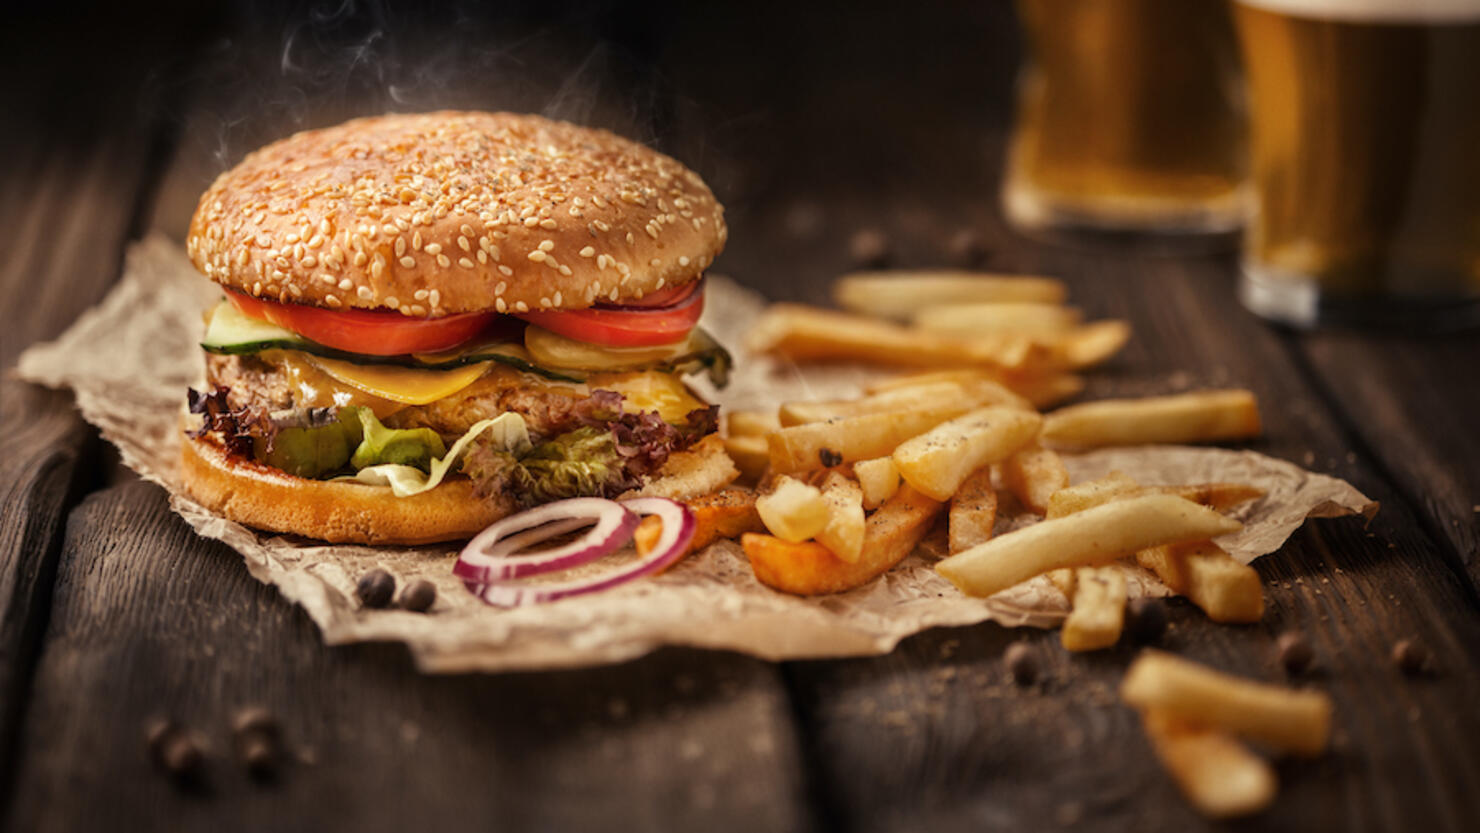 Tasty hamburger with french fries and beer on wooden table